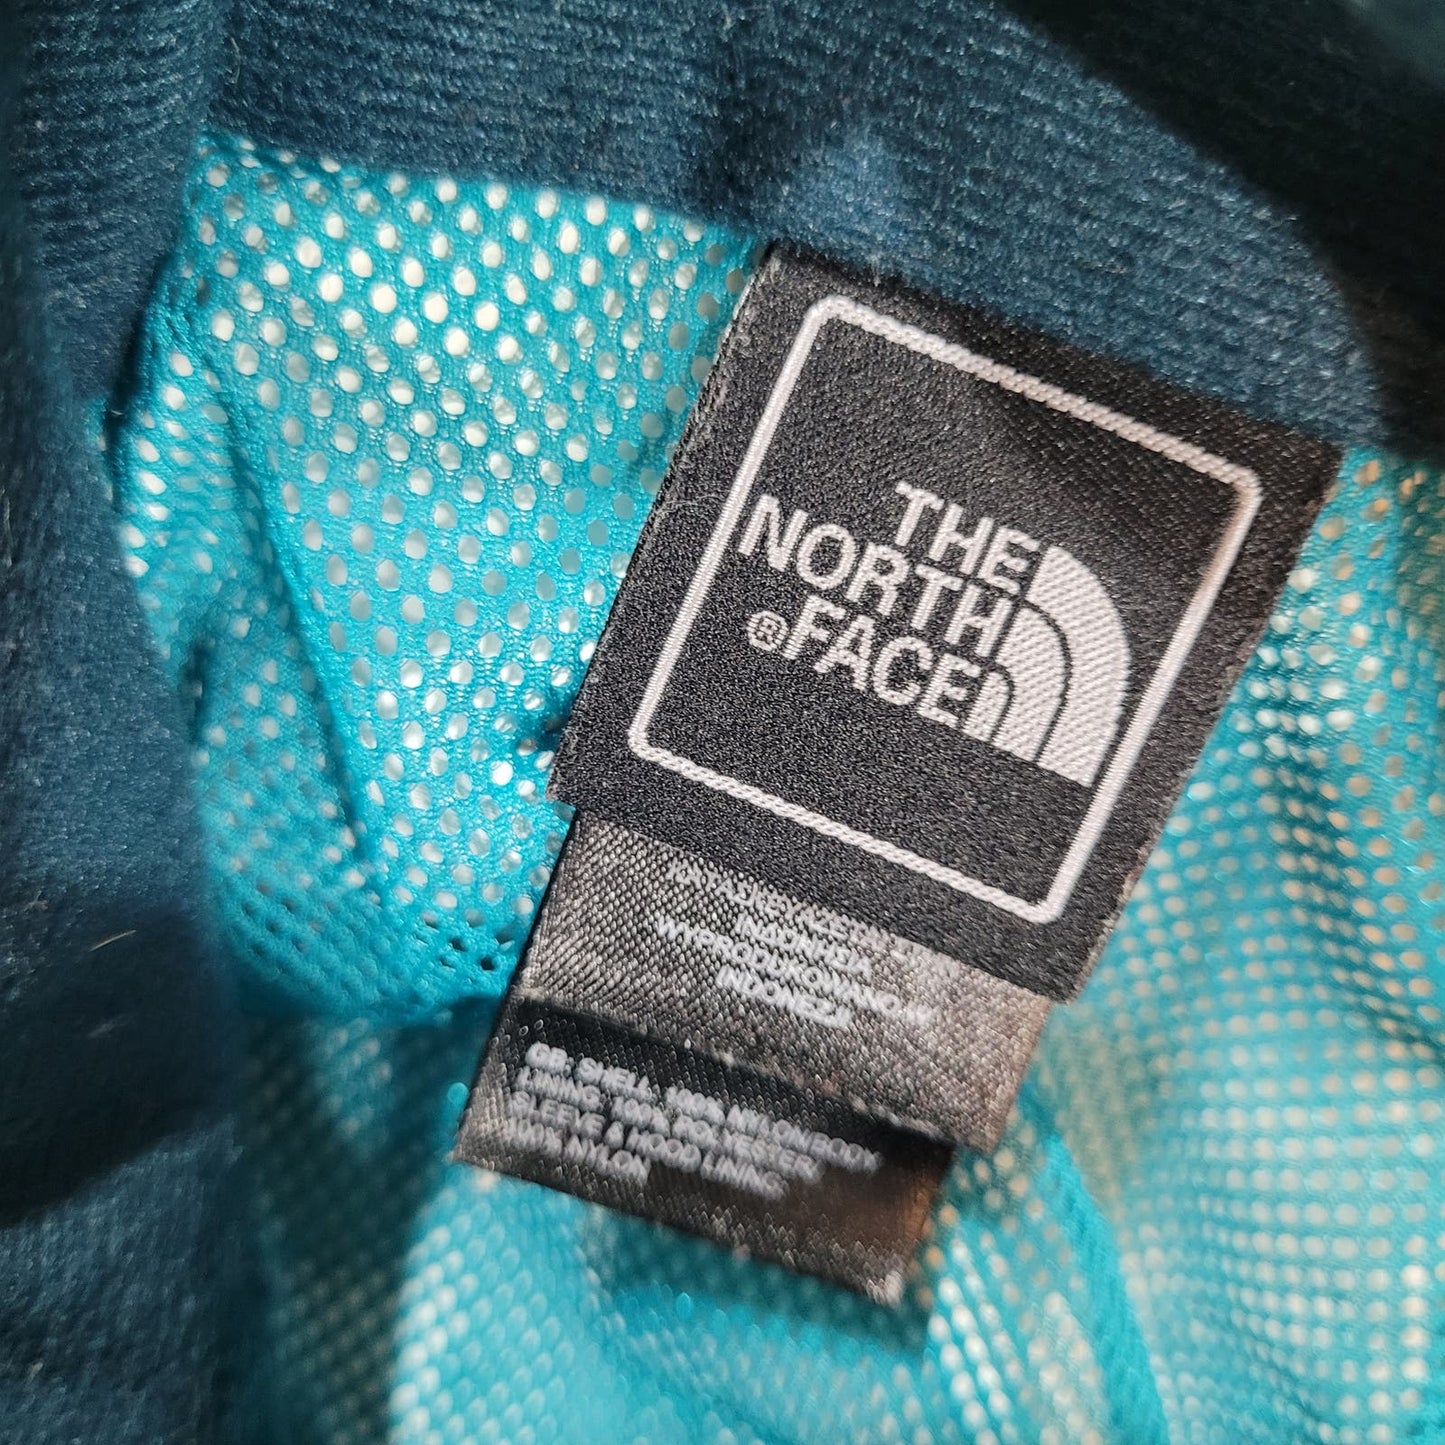 The North Face Resolve Jacket in Jaiden Green - Size Small